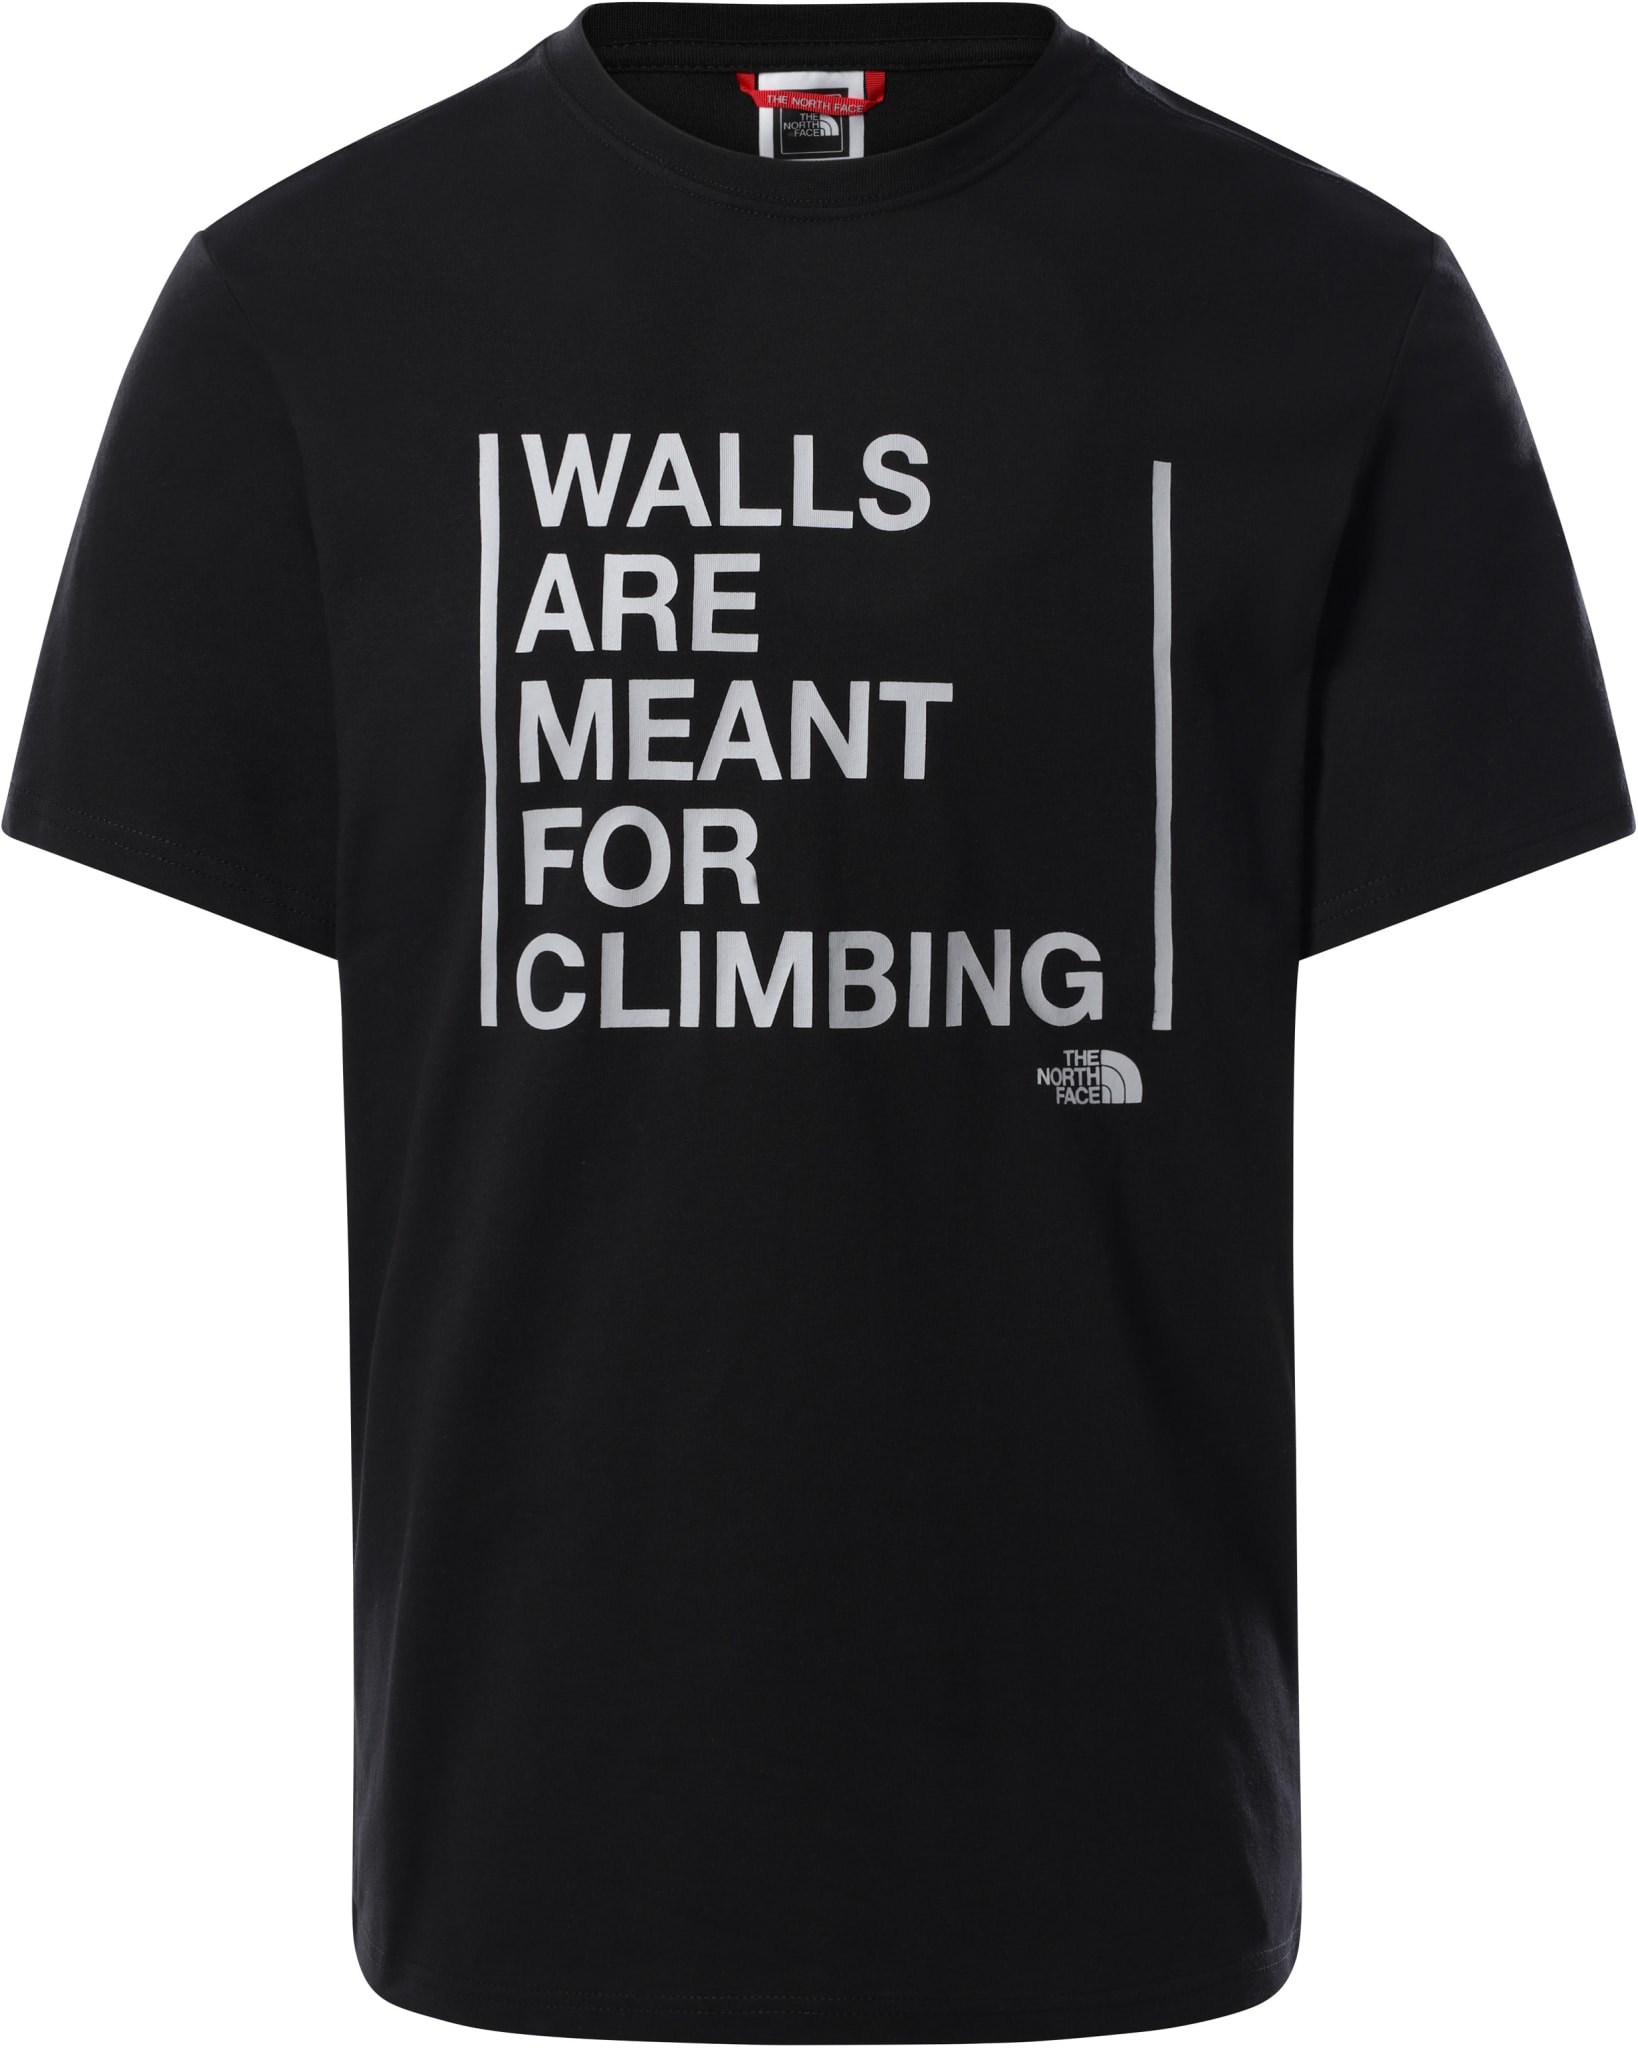 "Walls are meant for climbing"